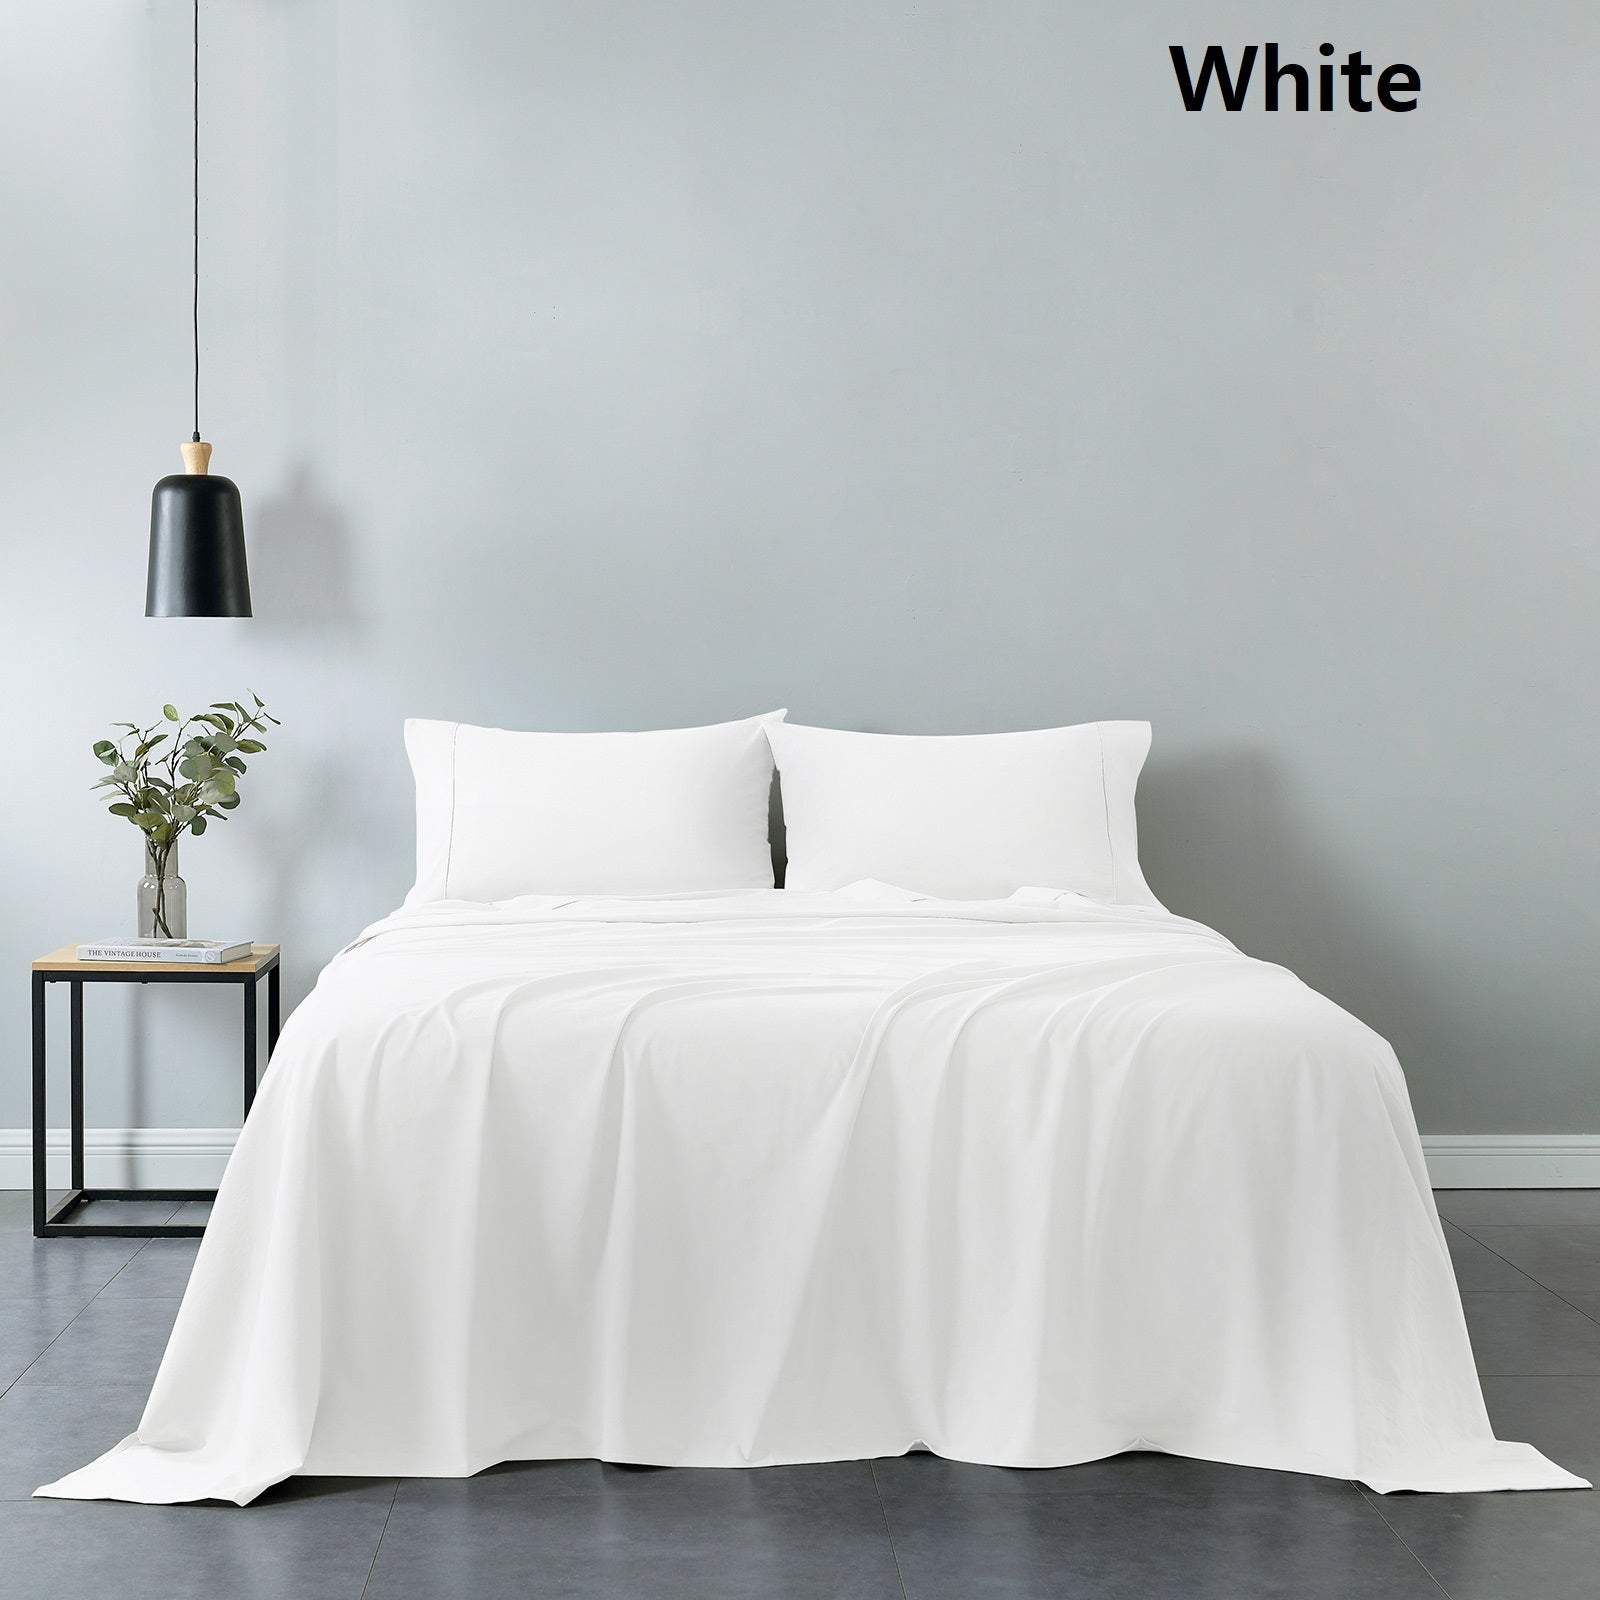 Royal Comfort Vintage Washed 100% Cotton Sheet Set Fitted Flat Sheet Pillowcases Queen White Deals499